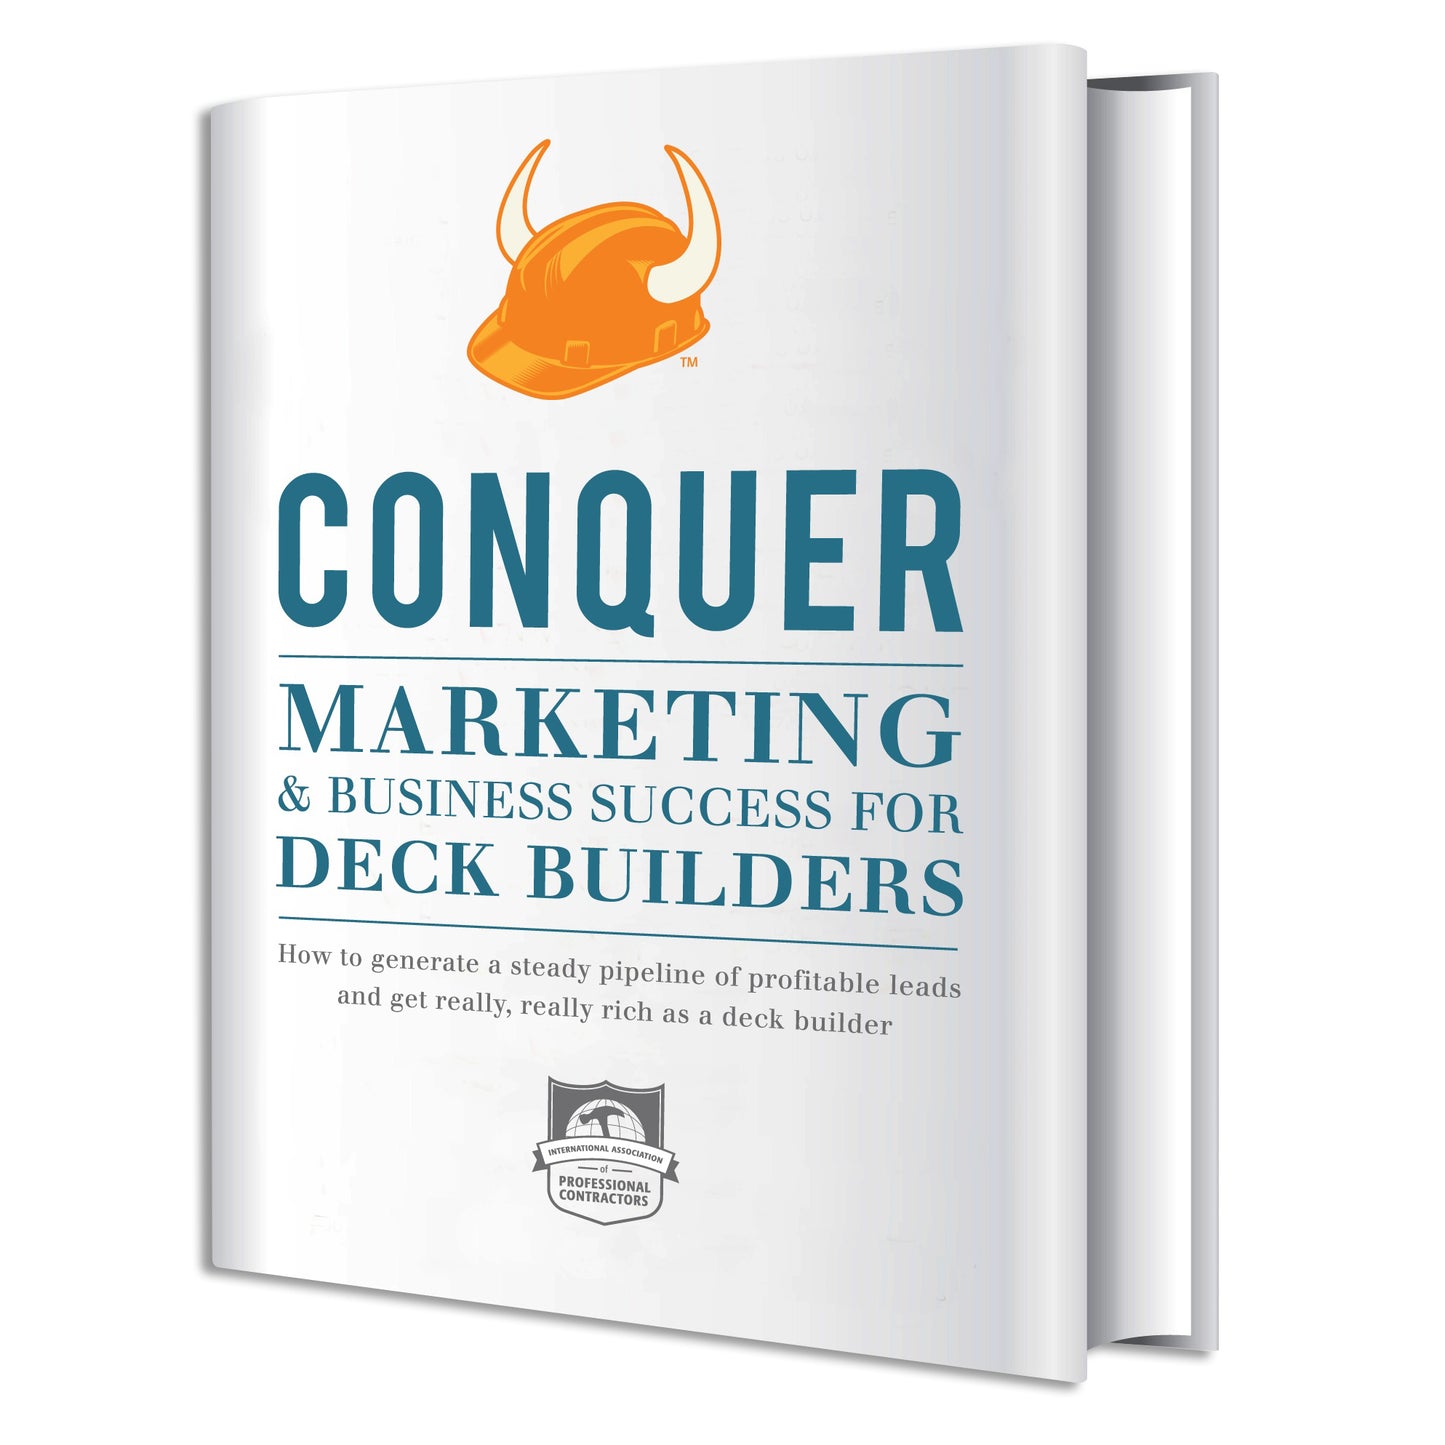 CONQUER Marketing and Business Success for Deck Builders PDF